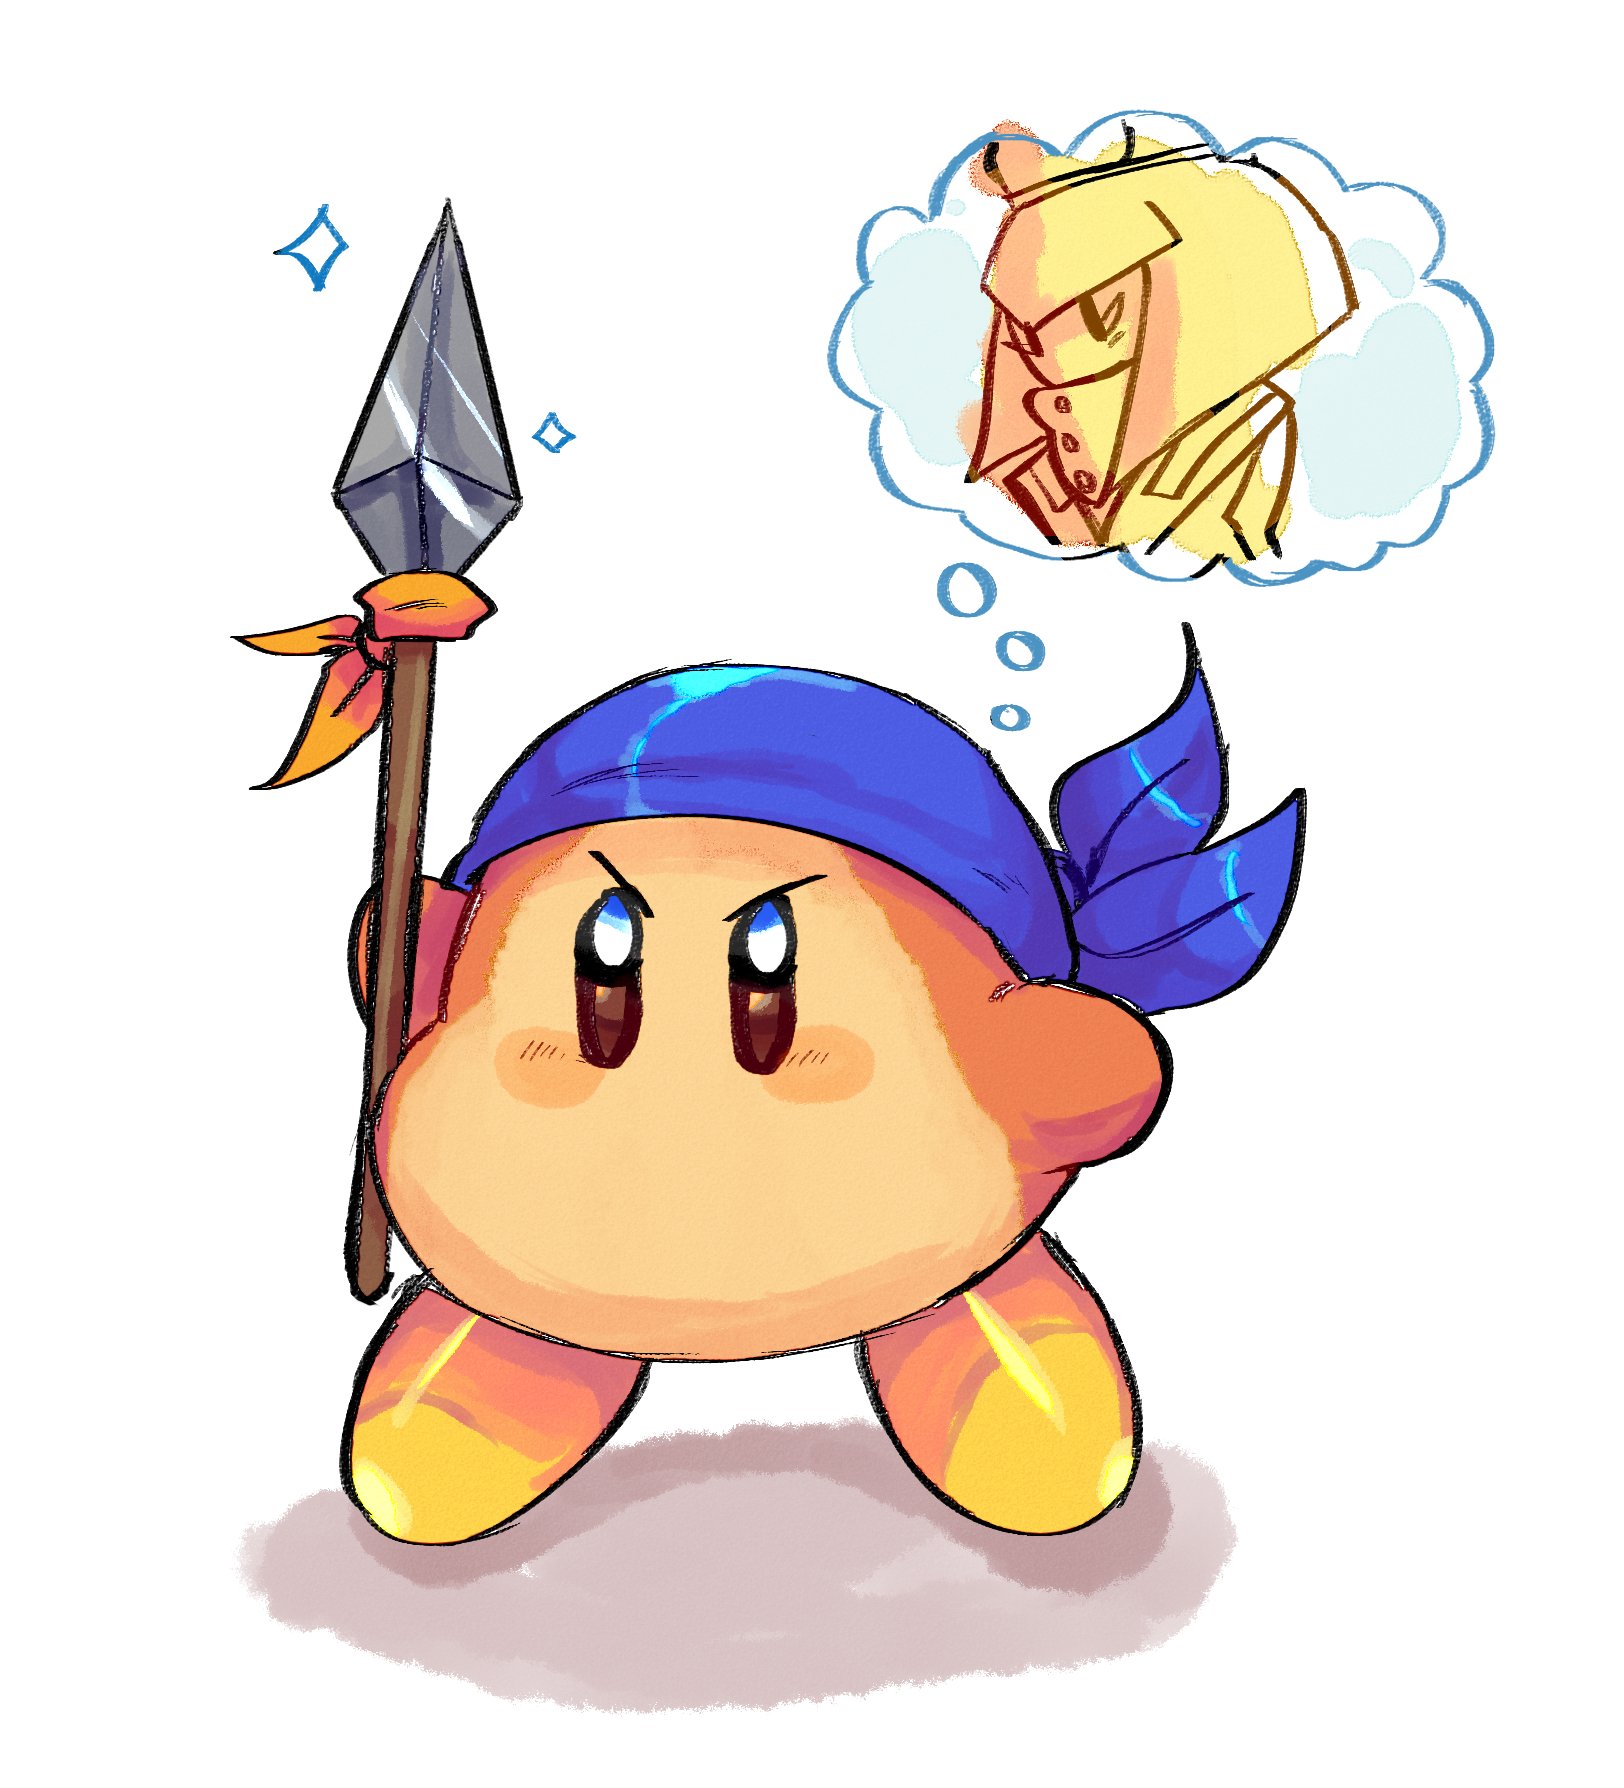 picnic Mentor Seminario Ashlxy Wxtch (OPEN COMMISSIONS 1/5) on Twitter: "Bandana Waddle Dee wishes  one day to be as strong with the spear as Zan Partizanne #fanart #kirby  #Nintendo #カービィの画力 https://t.co/NjnFKm9SUv" / Twitter